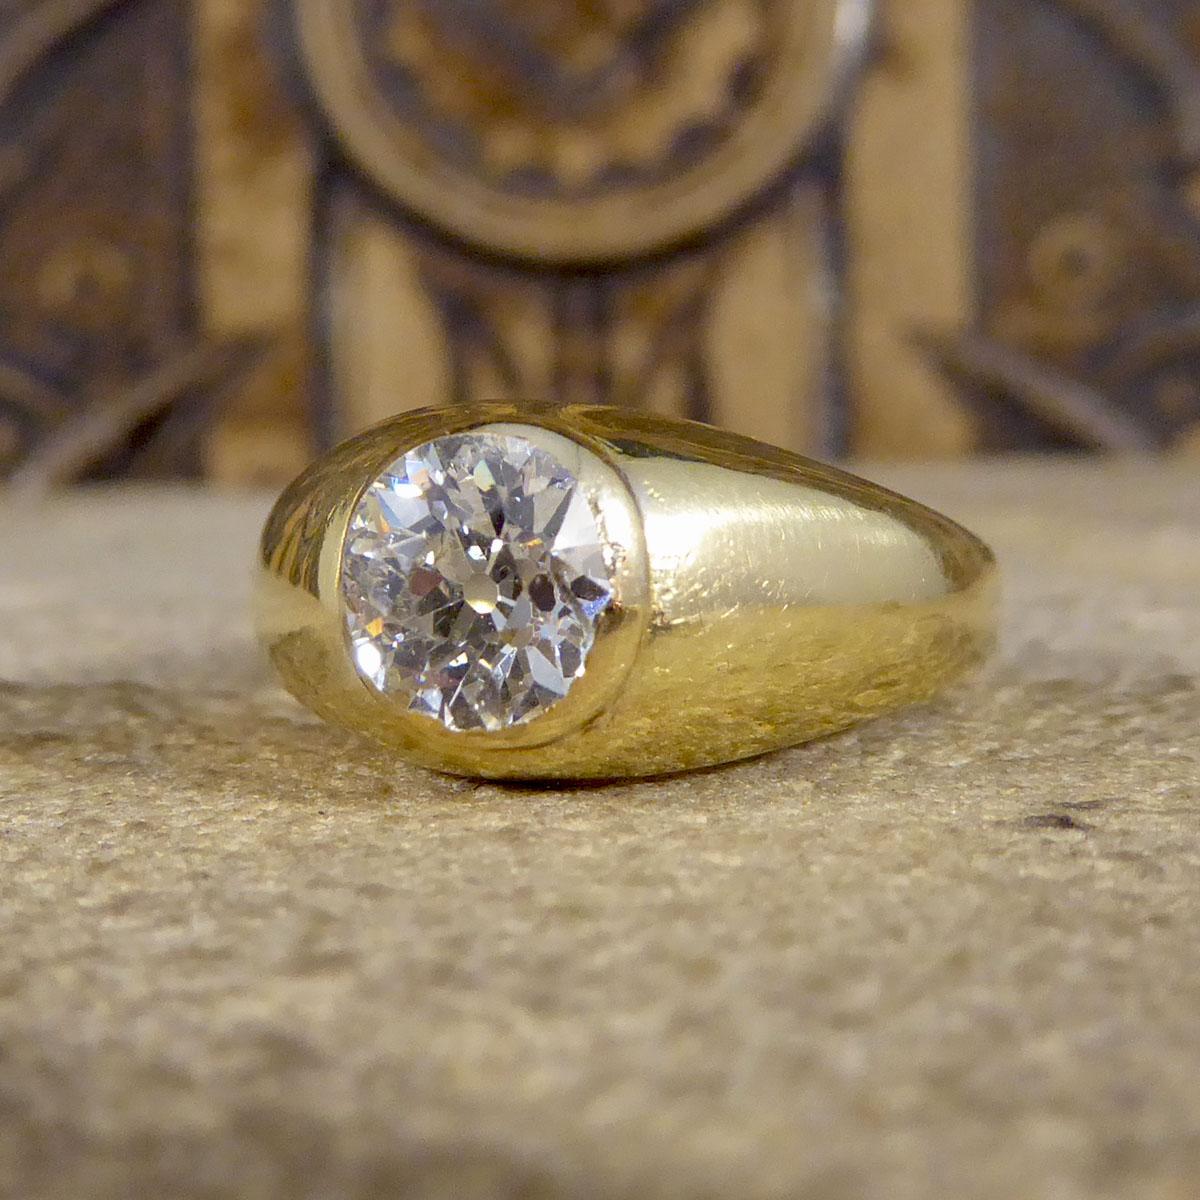 Late Victorian Gypsy Set 0.85ct Old Cushion Cut Diamond Ring in 18ct Yellow Gold 1